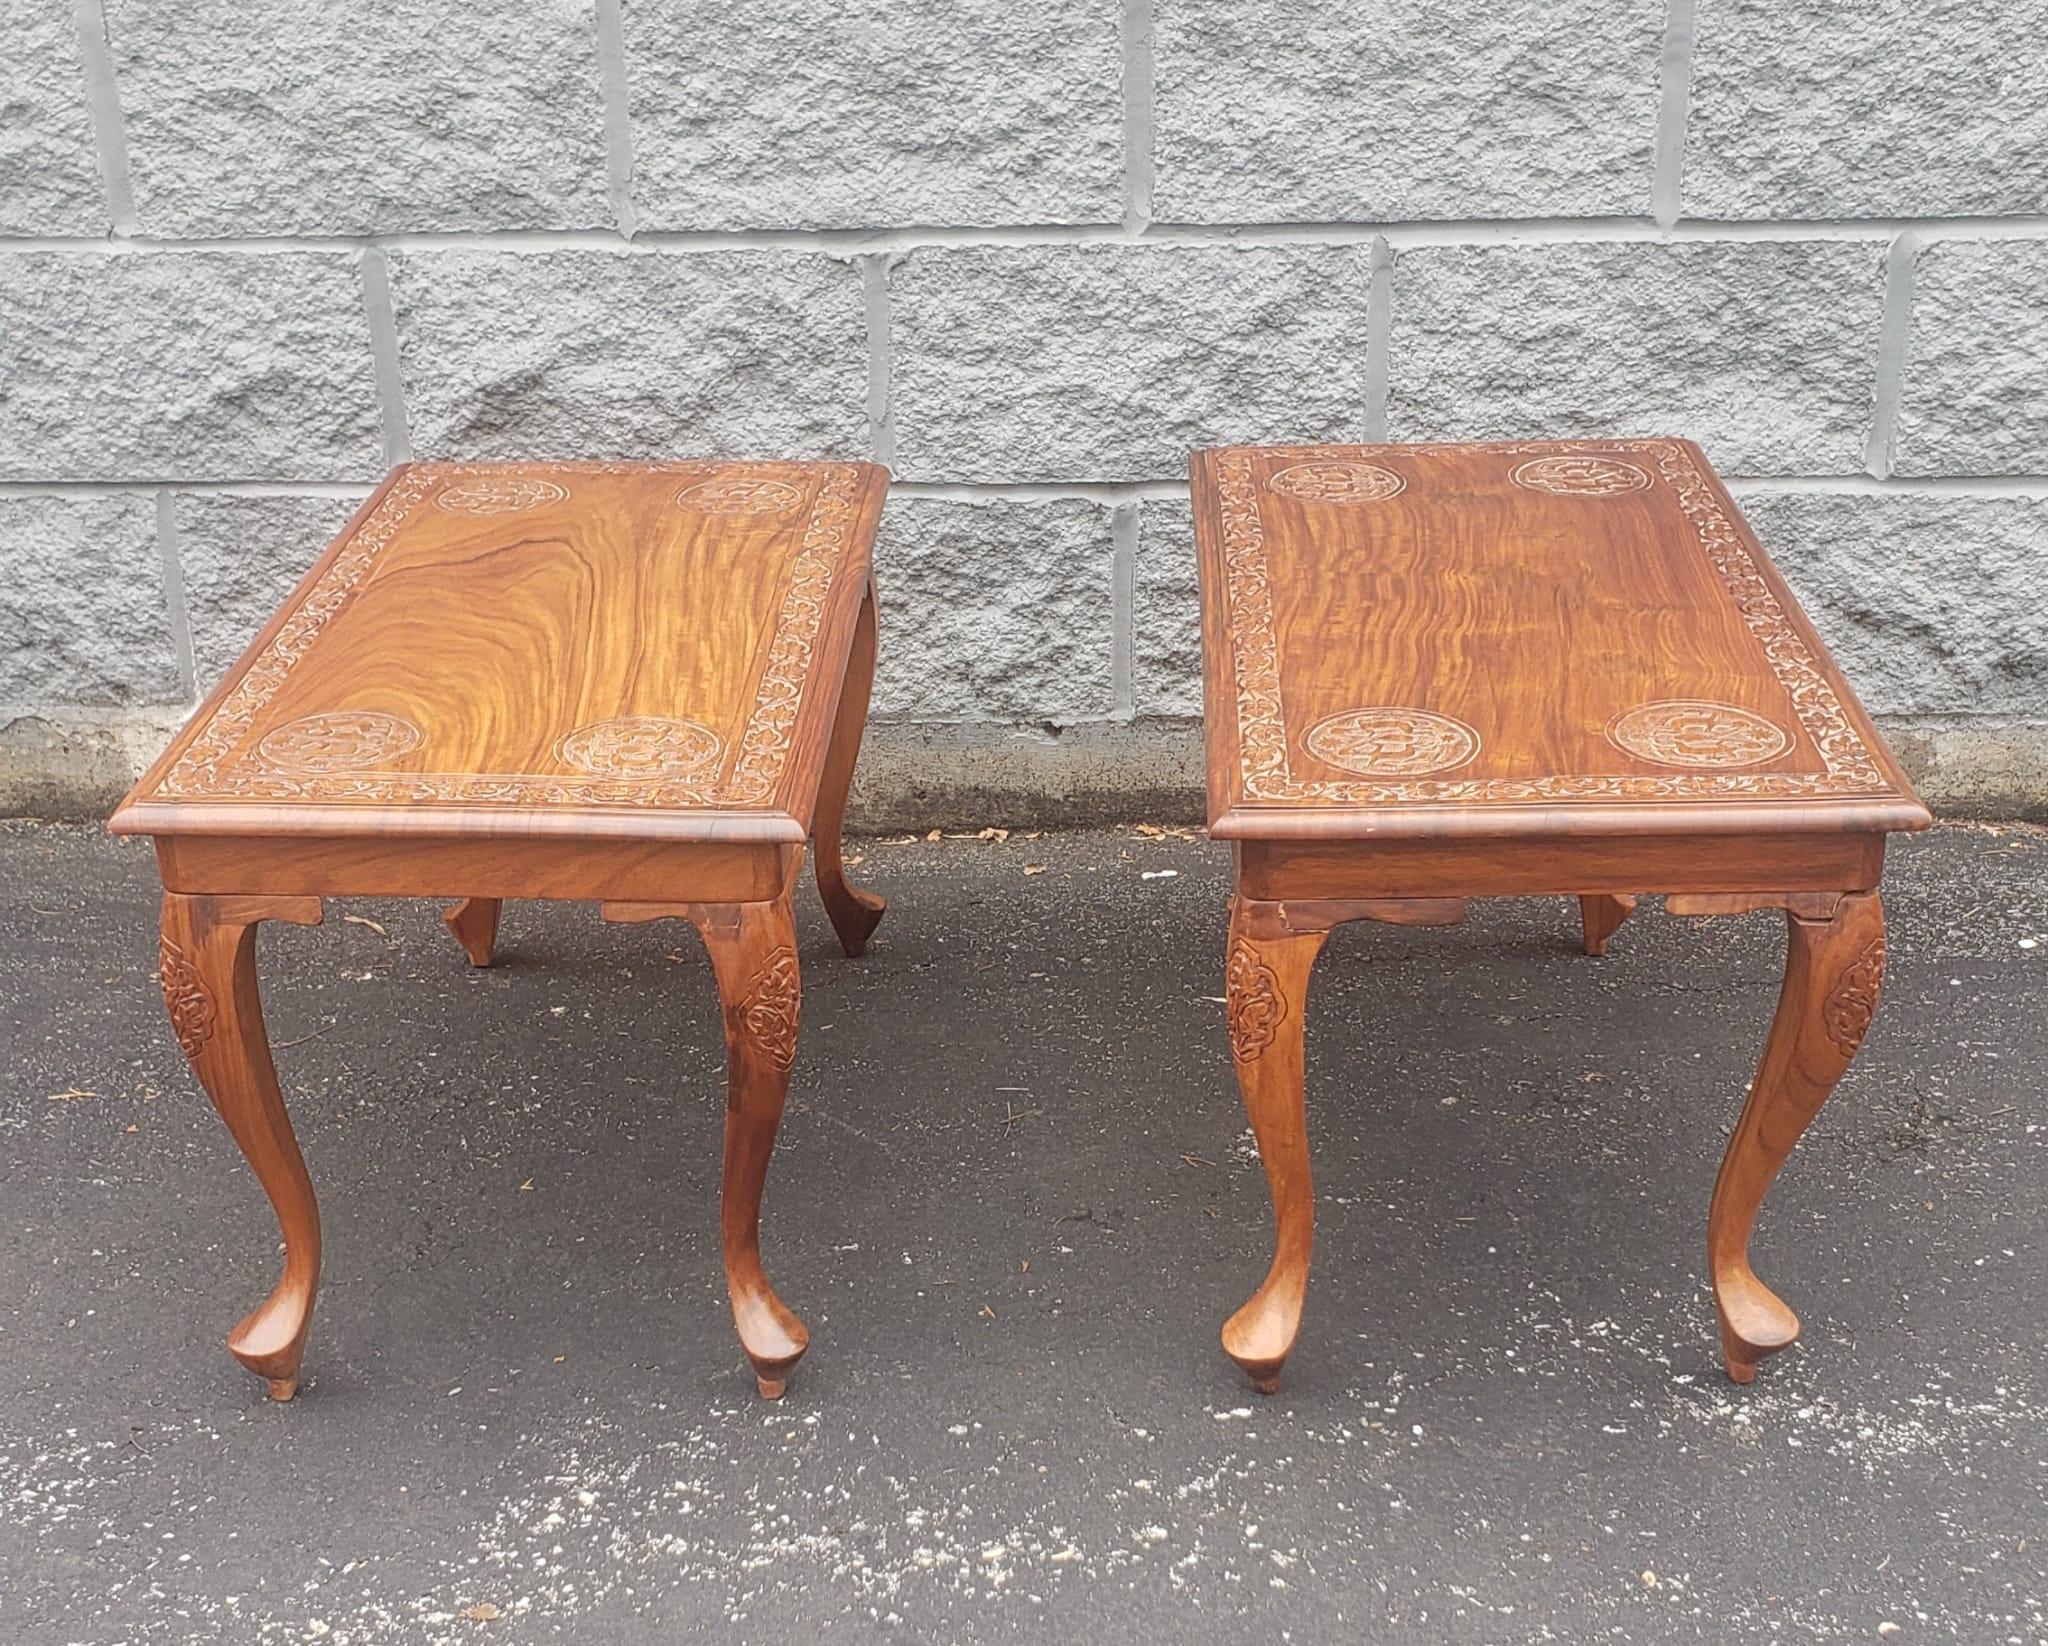 Midcentury Anglo-Japanese Carved Hardwood Low Side Tables, a Pair For Sale 6